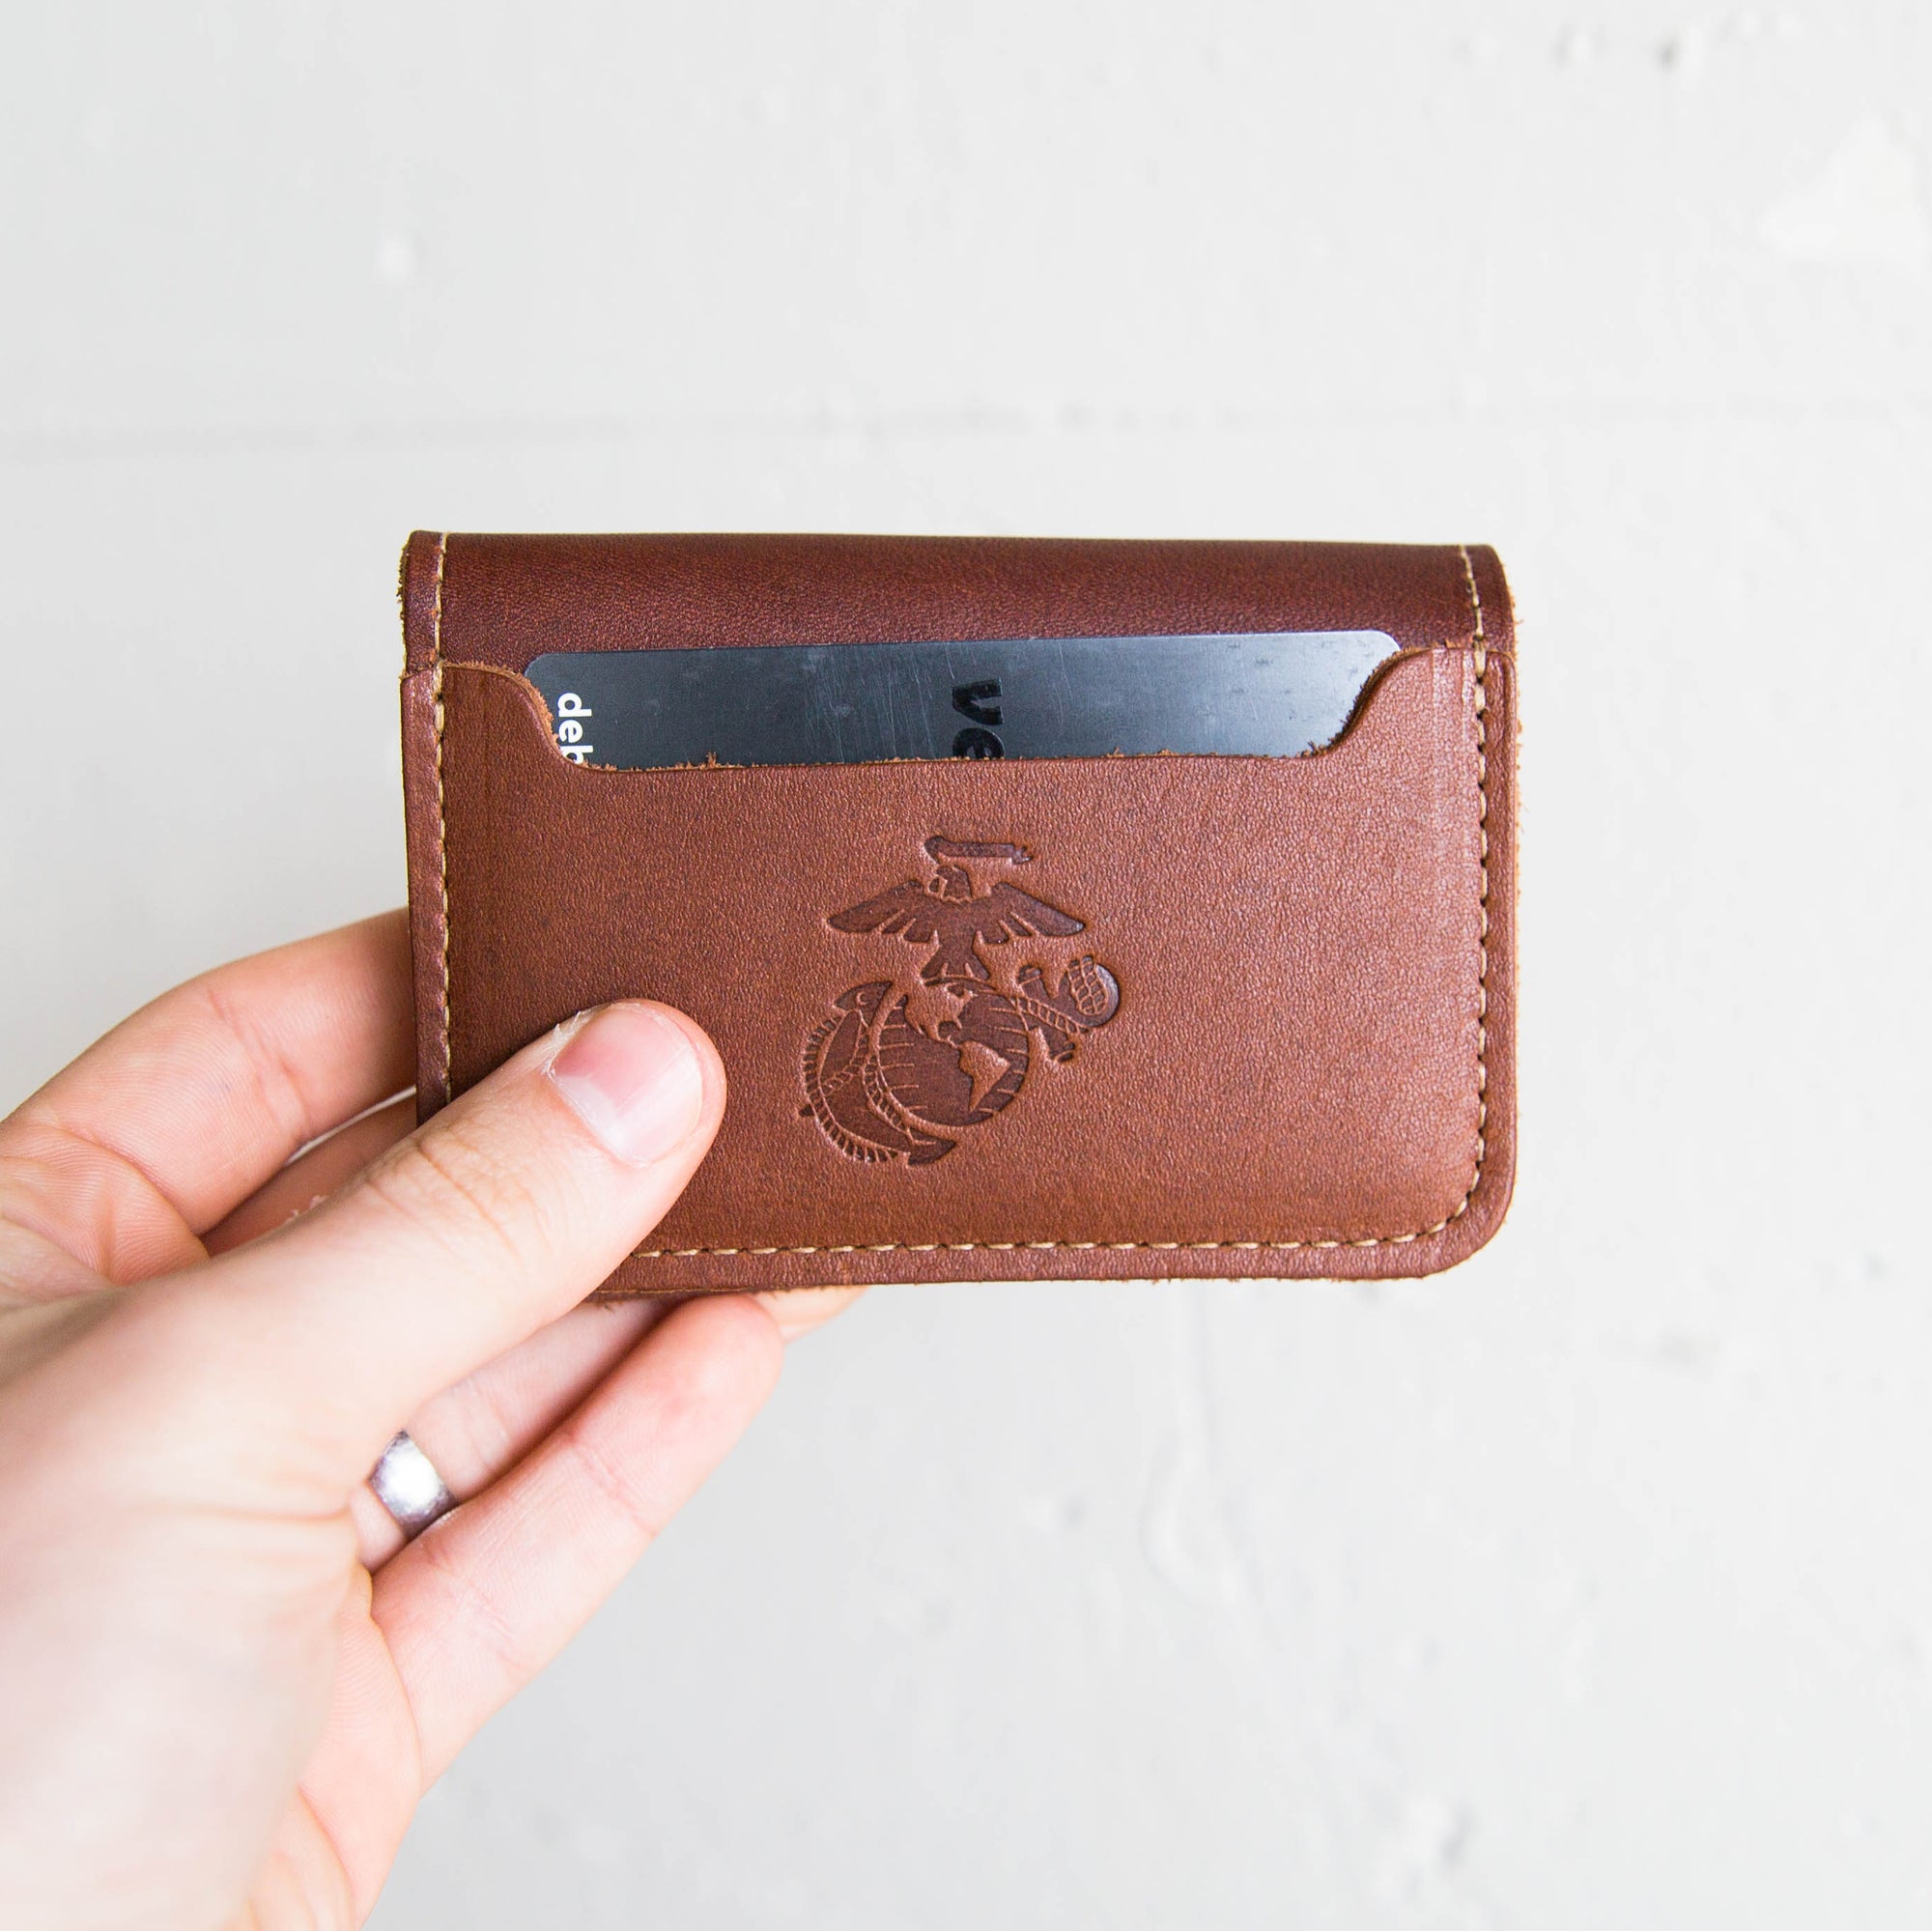 The Jefferson Personalized Fine Leather Card Holder Wallet, Brownat Holtz Leather